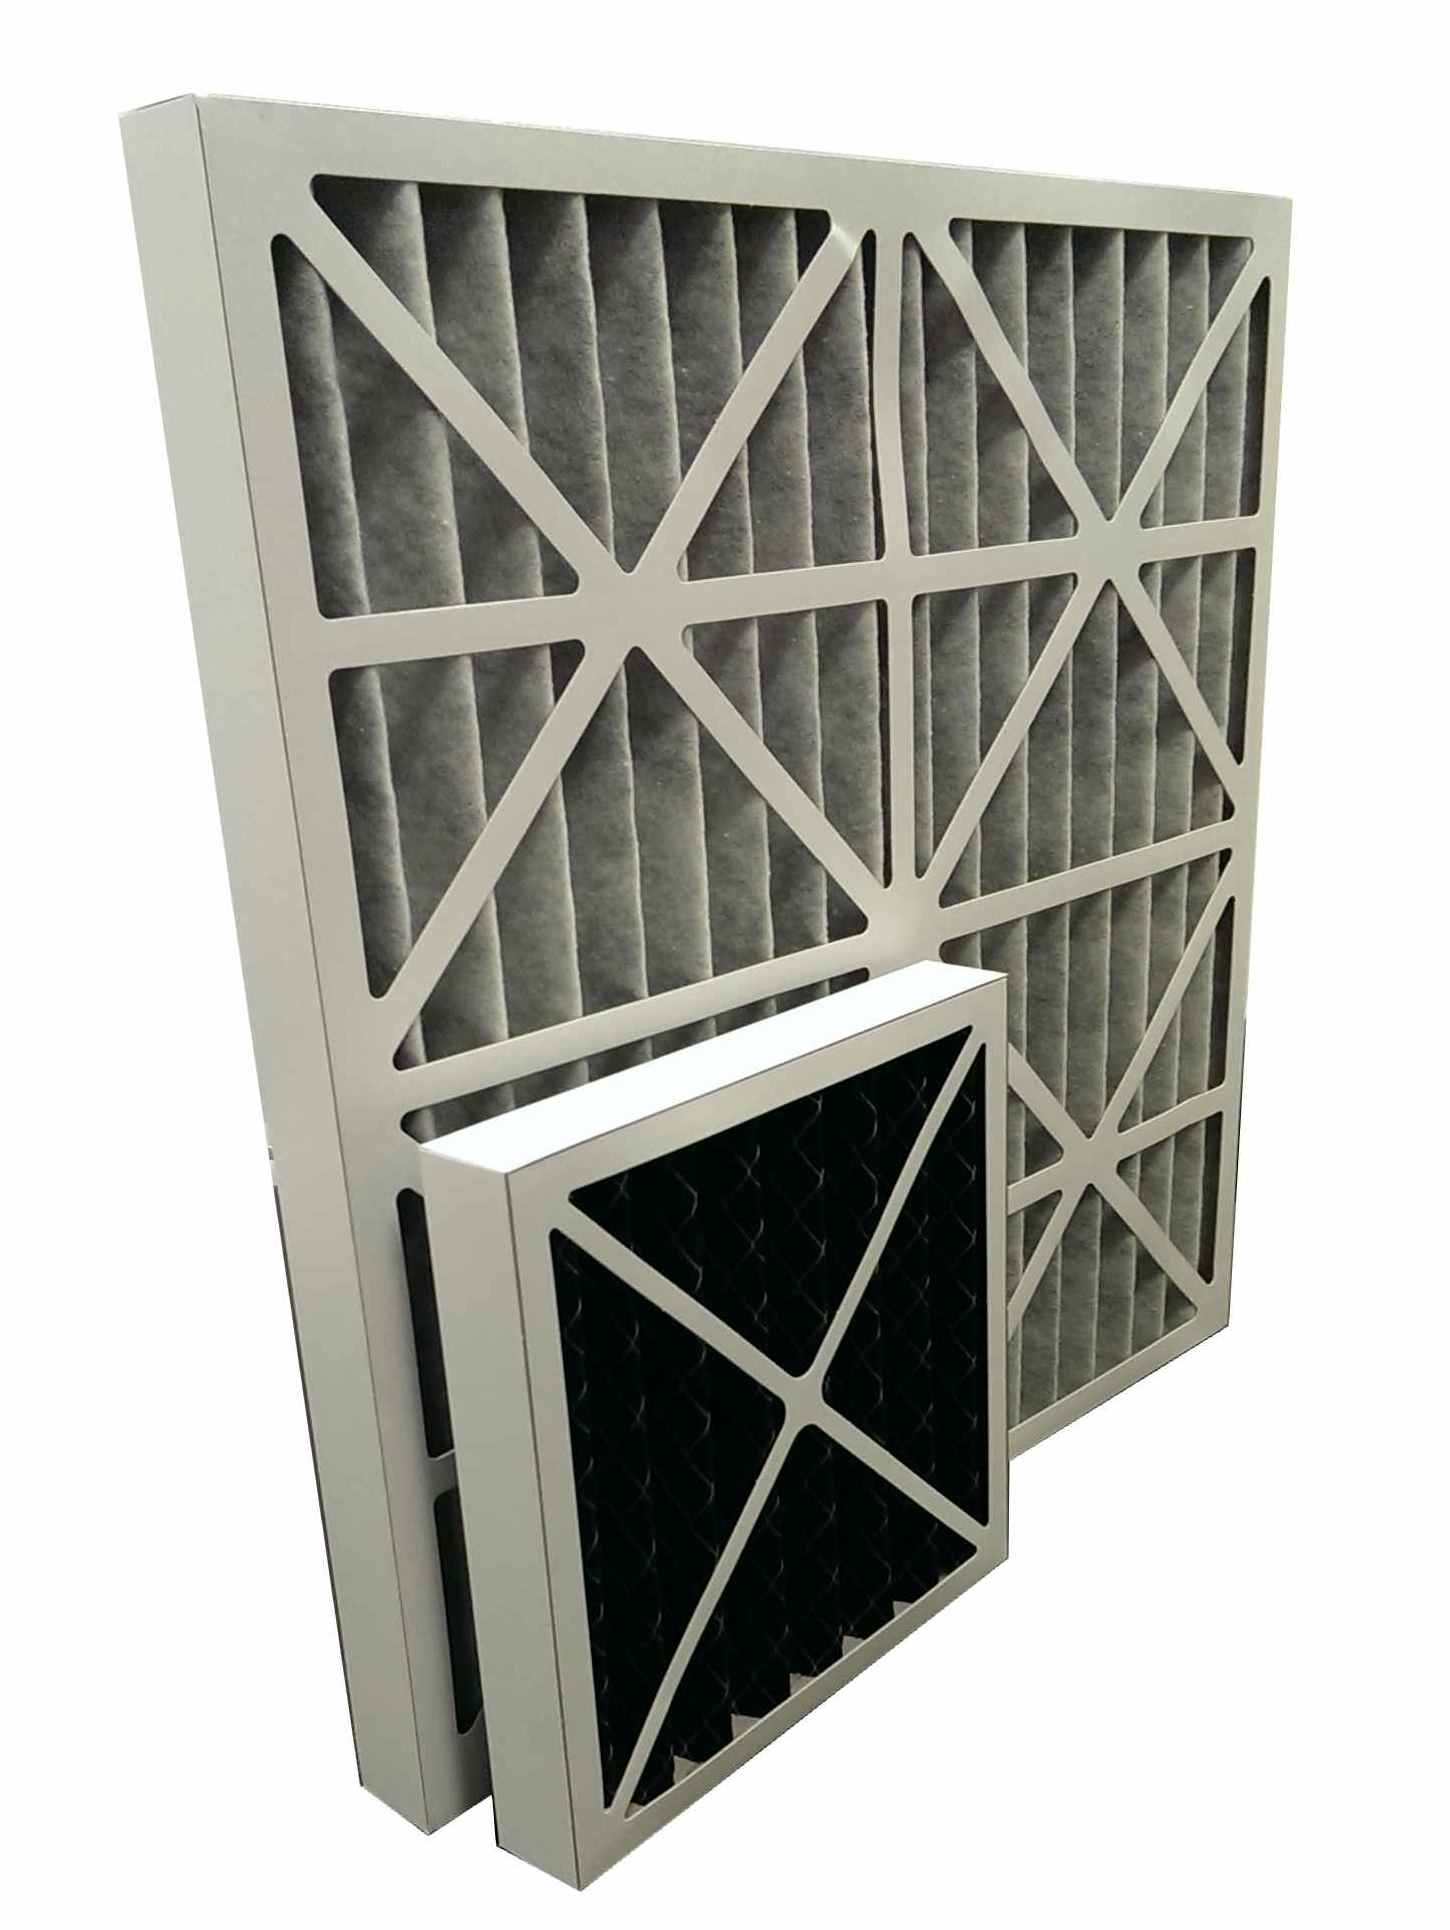 Composite Air Filter for Gas & Particle Filtration - MERV 13 - 24"x24"x2"/12"x12"x2"